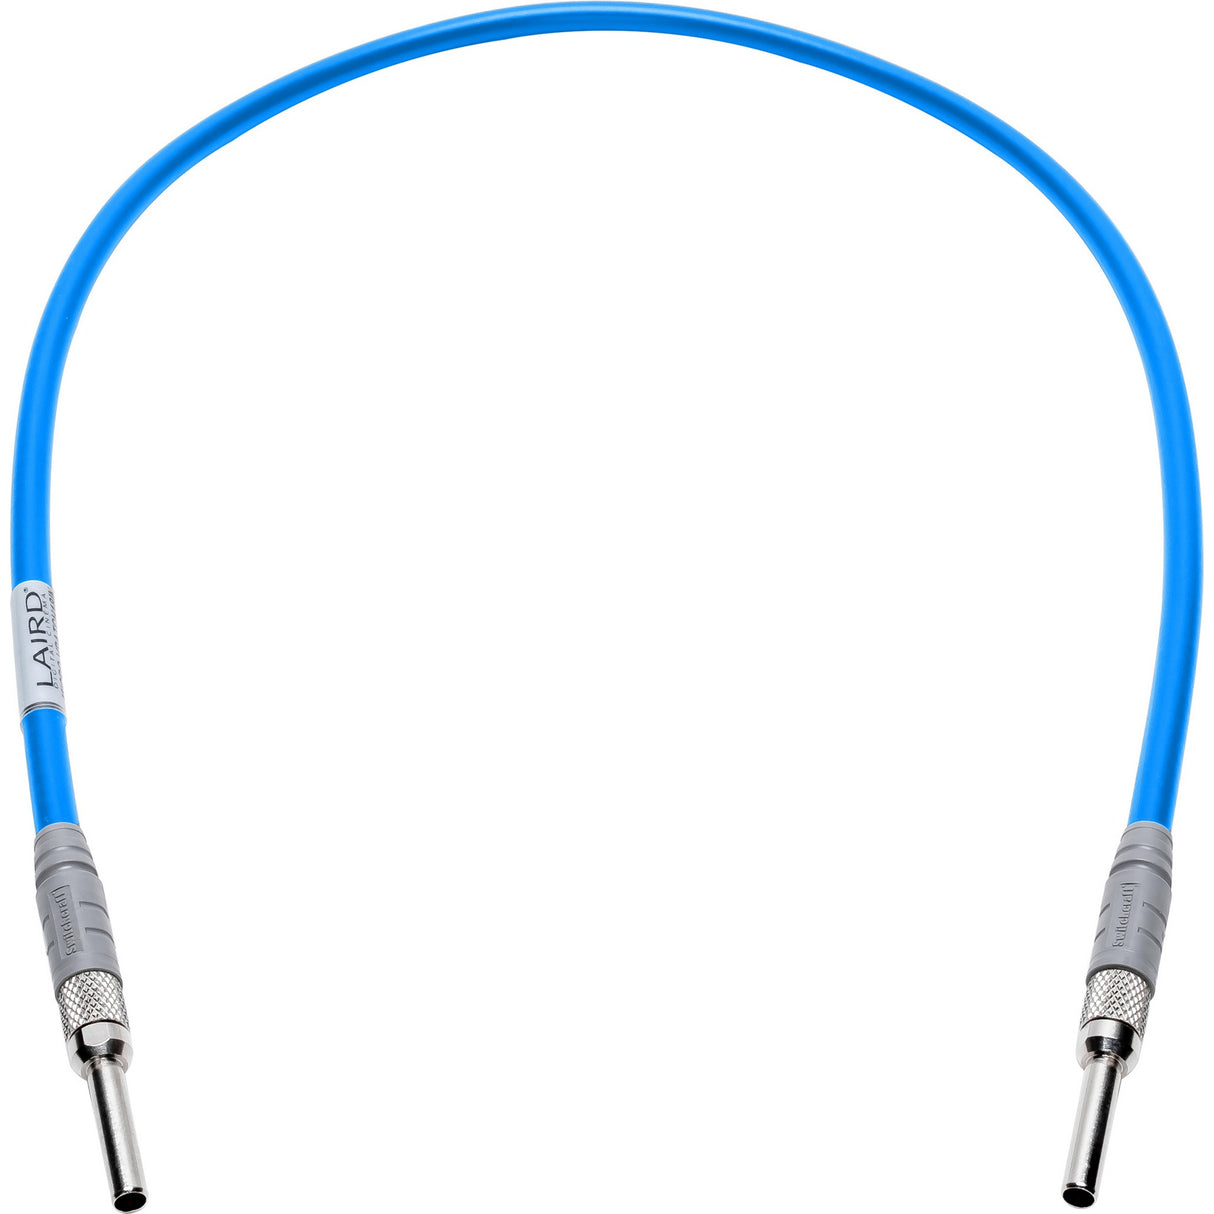 Laird MICRO-VPATCH-002BE 12G-SDI Micro Video Patch Cable, Light Blue, 2-Feet